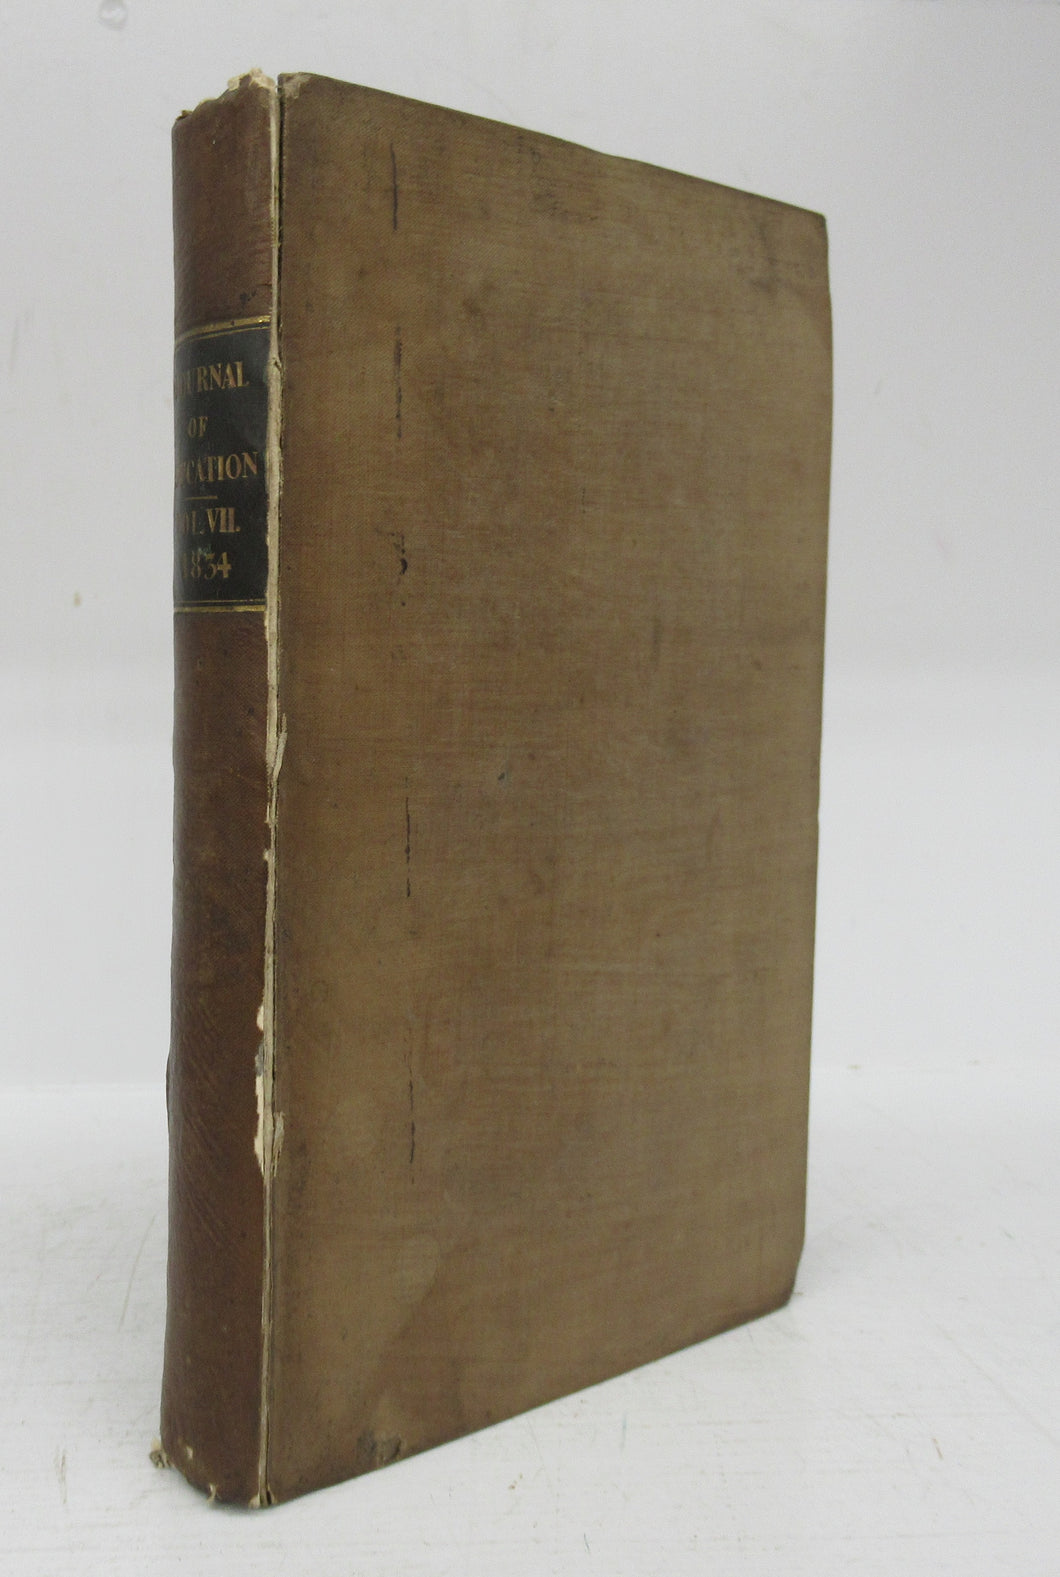 The Quarterly Journal of Education  1834